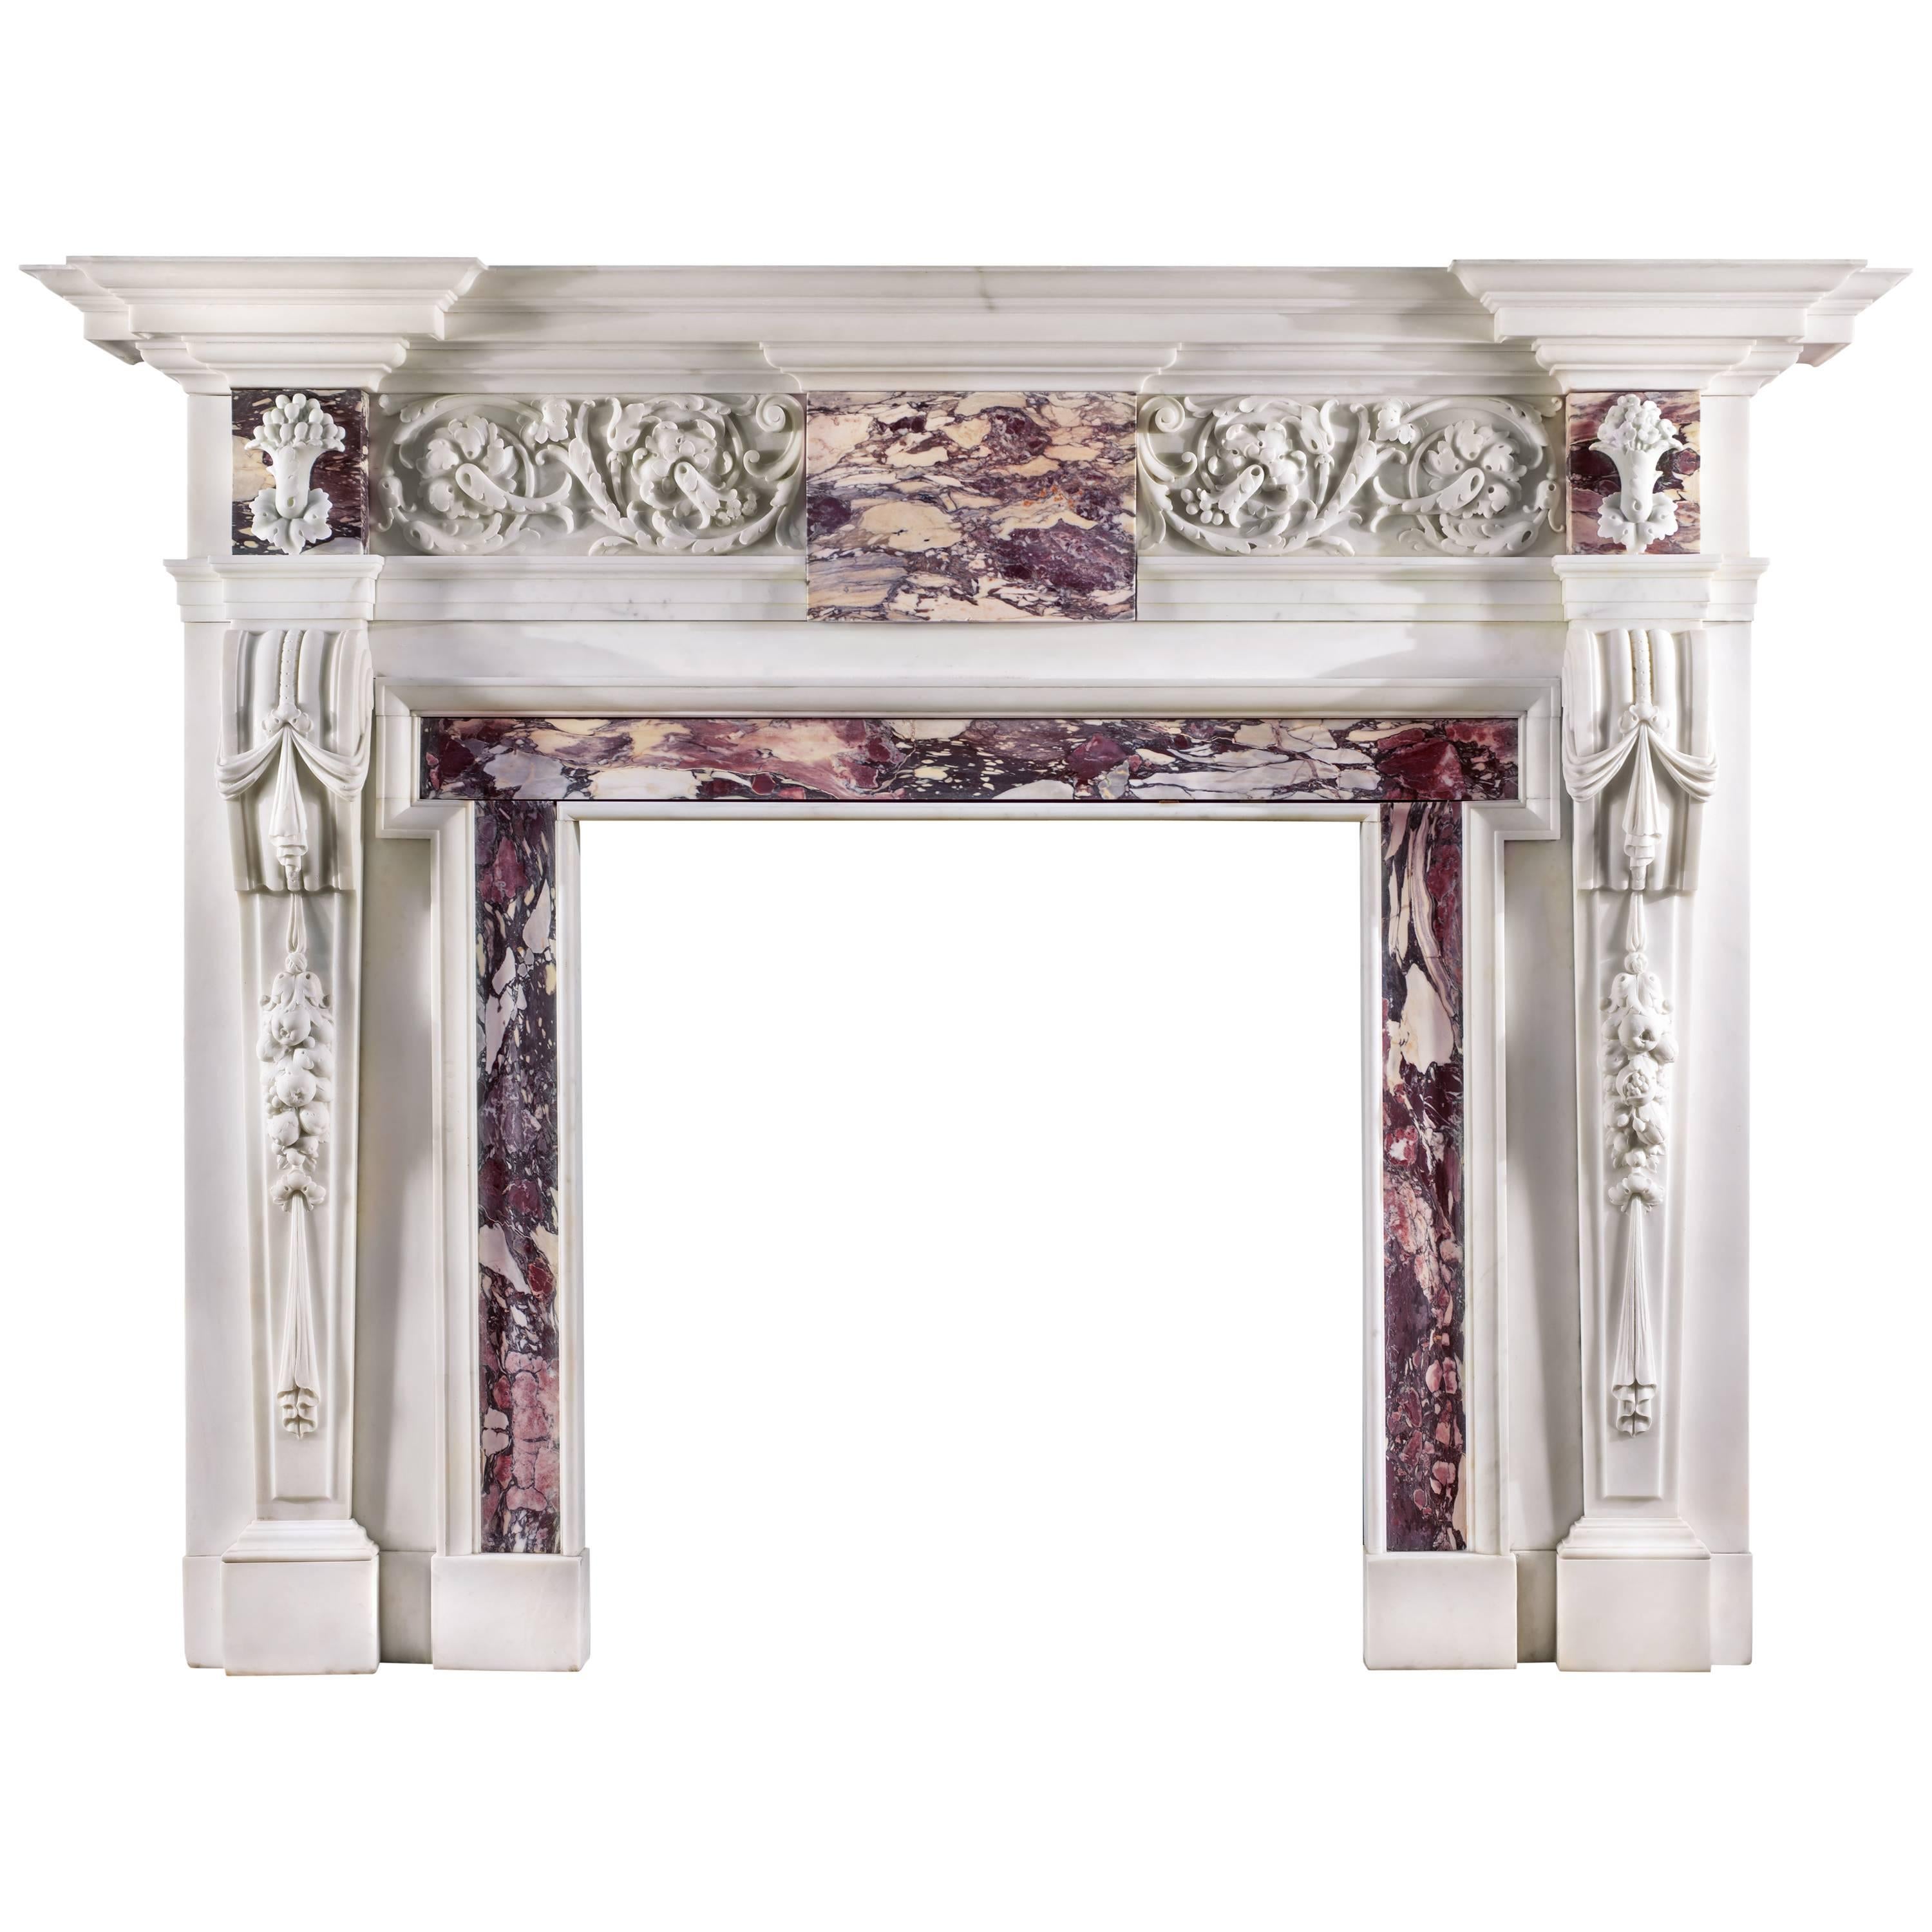 Antique Palladian Style Chimneypiece in the Manner of William Kent